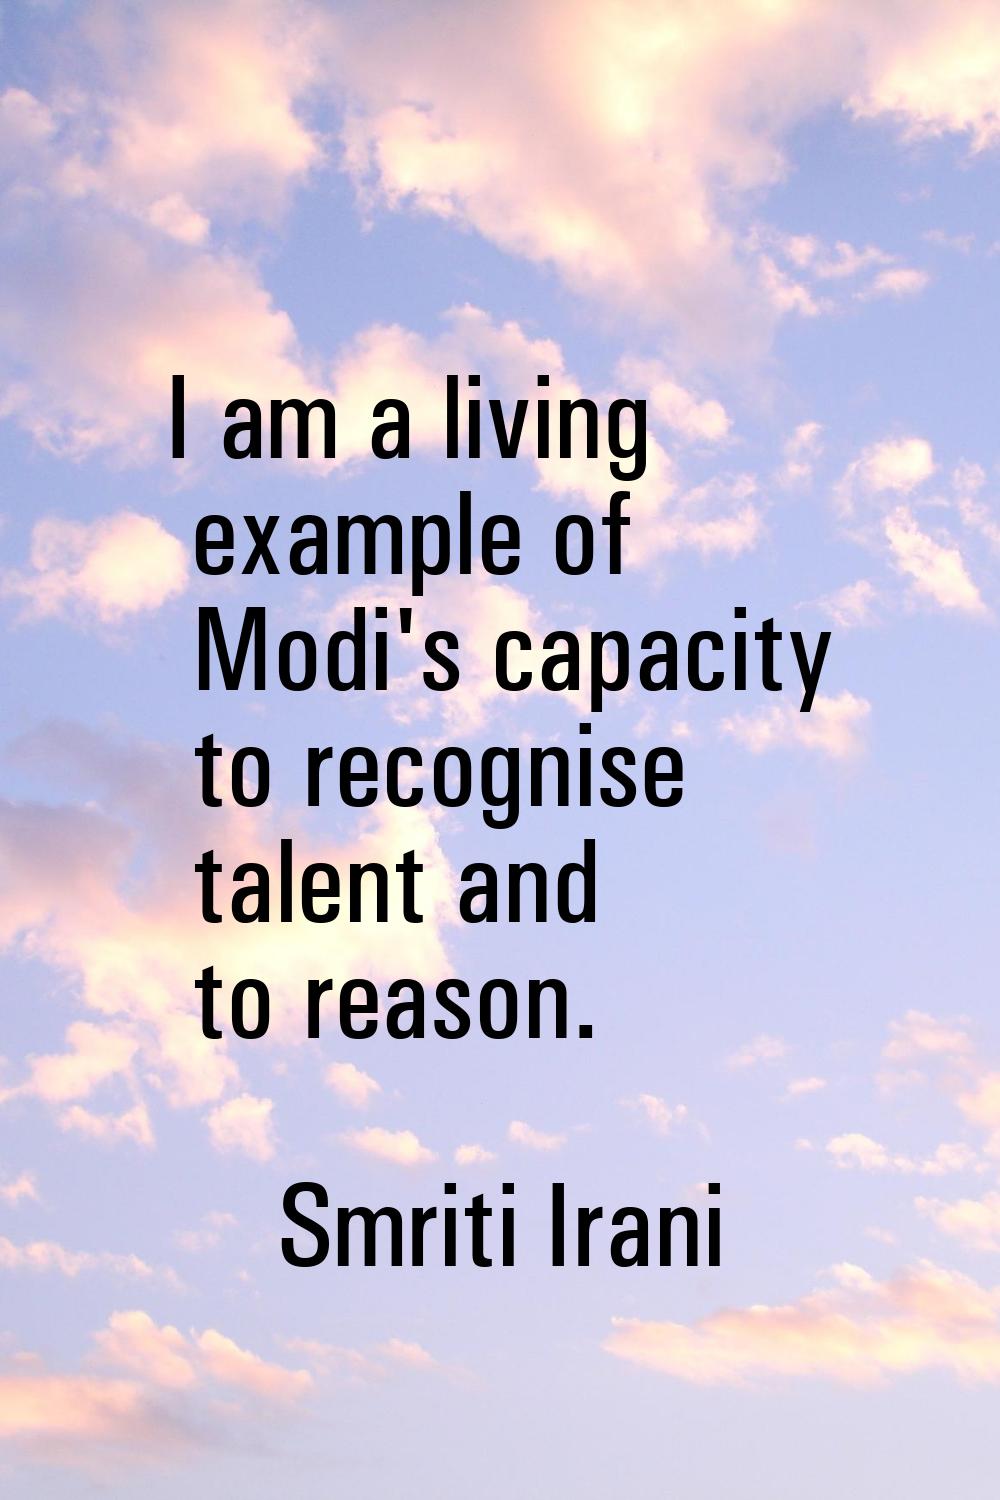 I am a living example of Modi's capacity to recognise talent and to reason.